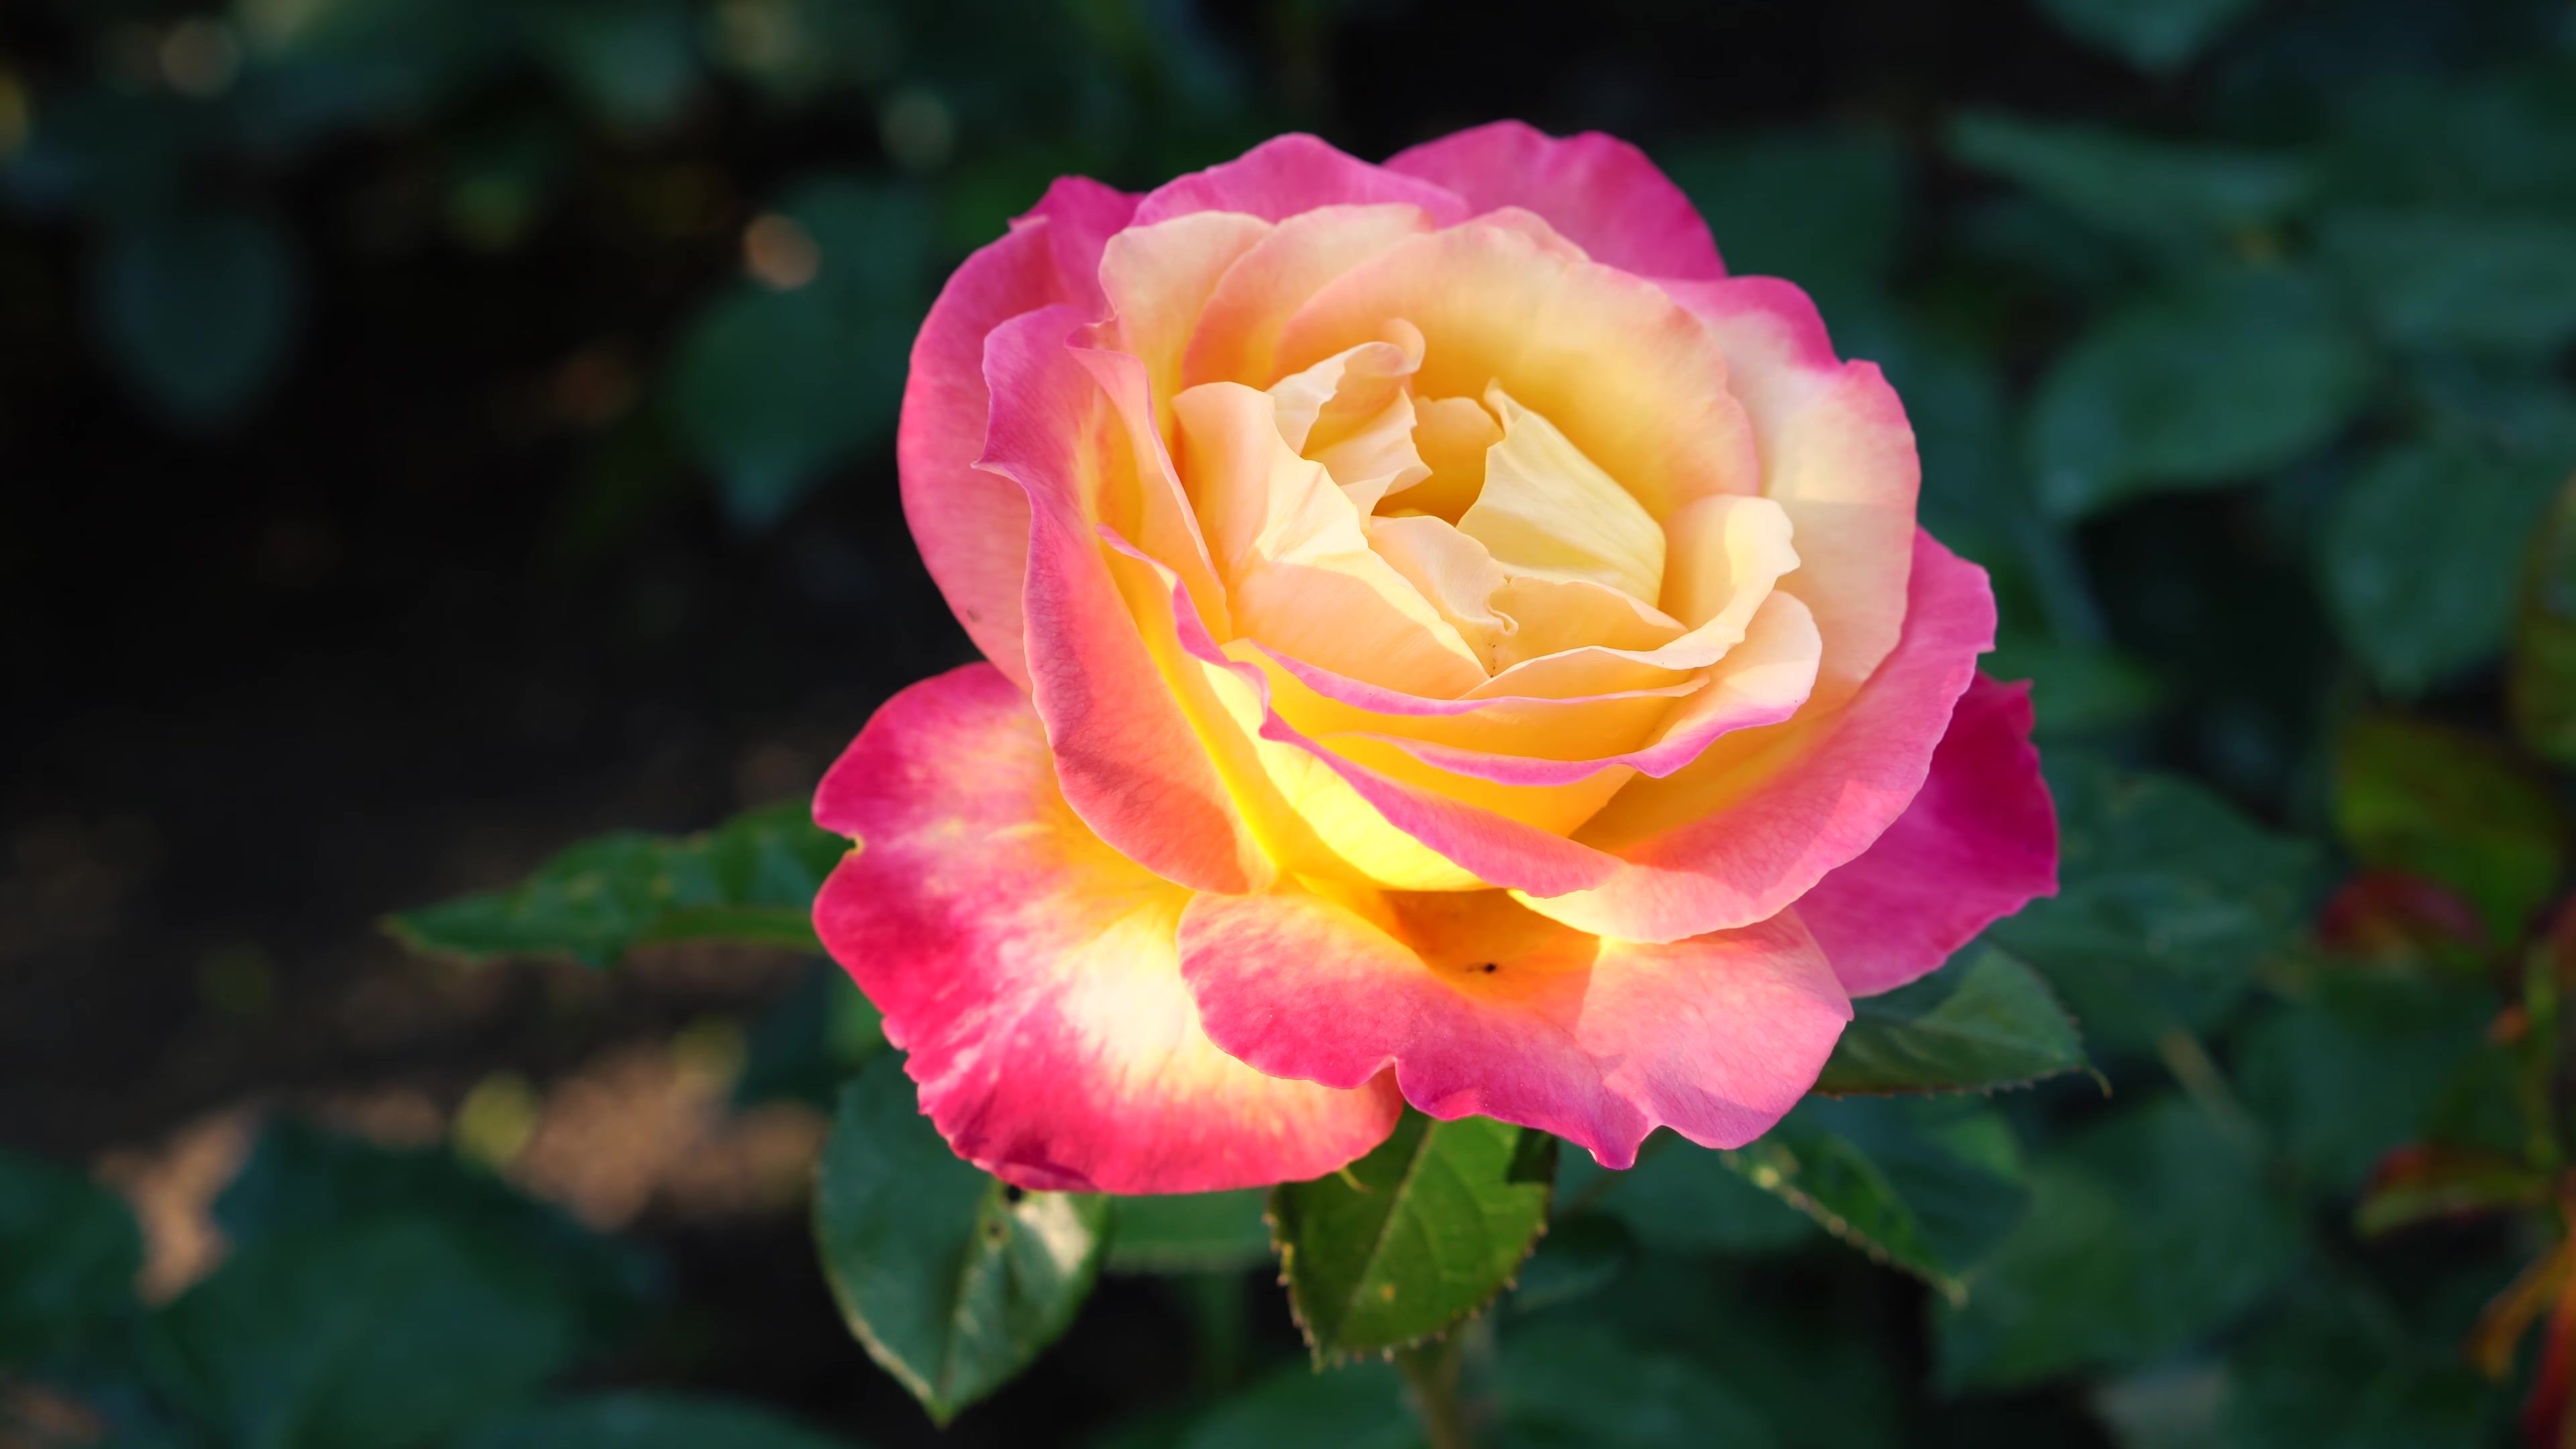 Pink + Yellow Rose Flower 4K Ultra HD Wallpaper, Photo, Picture